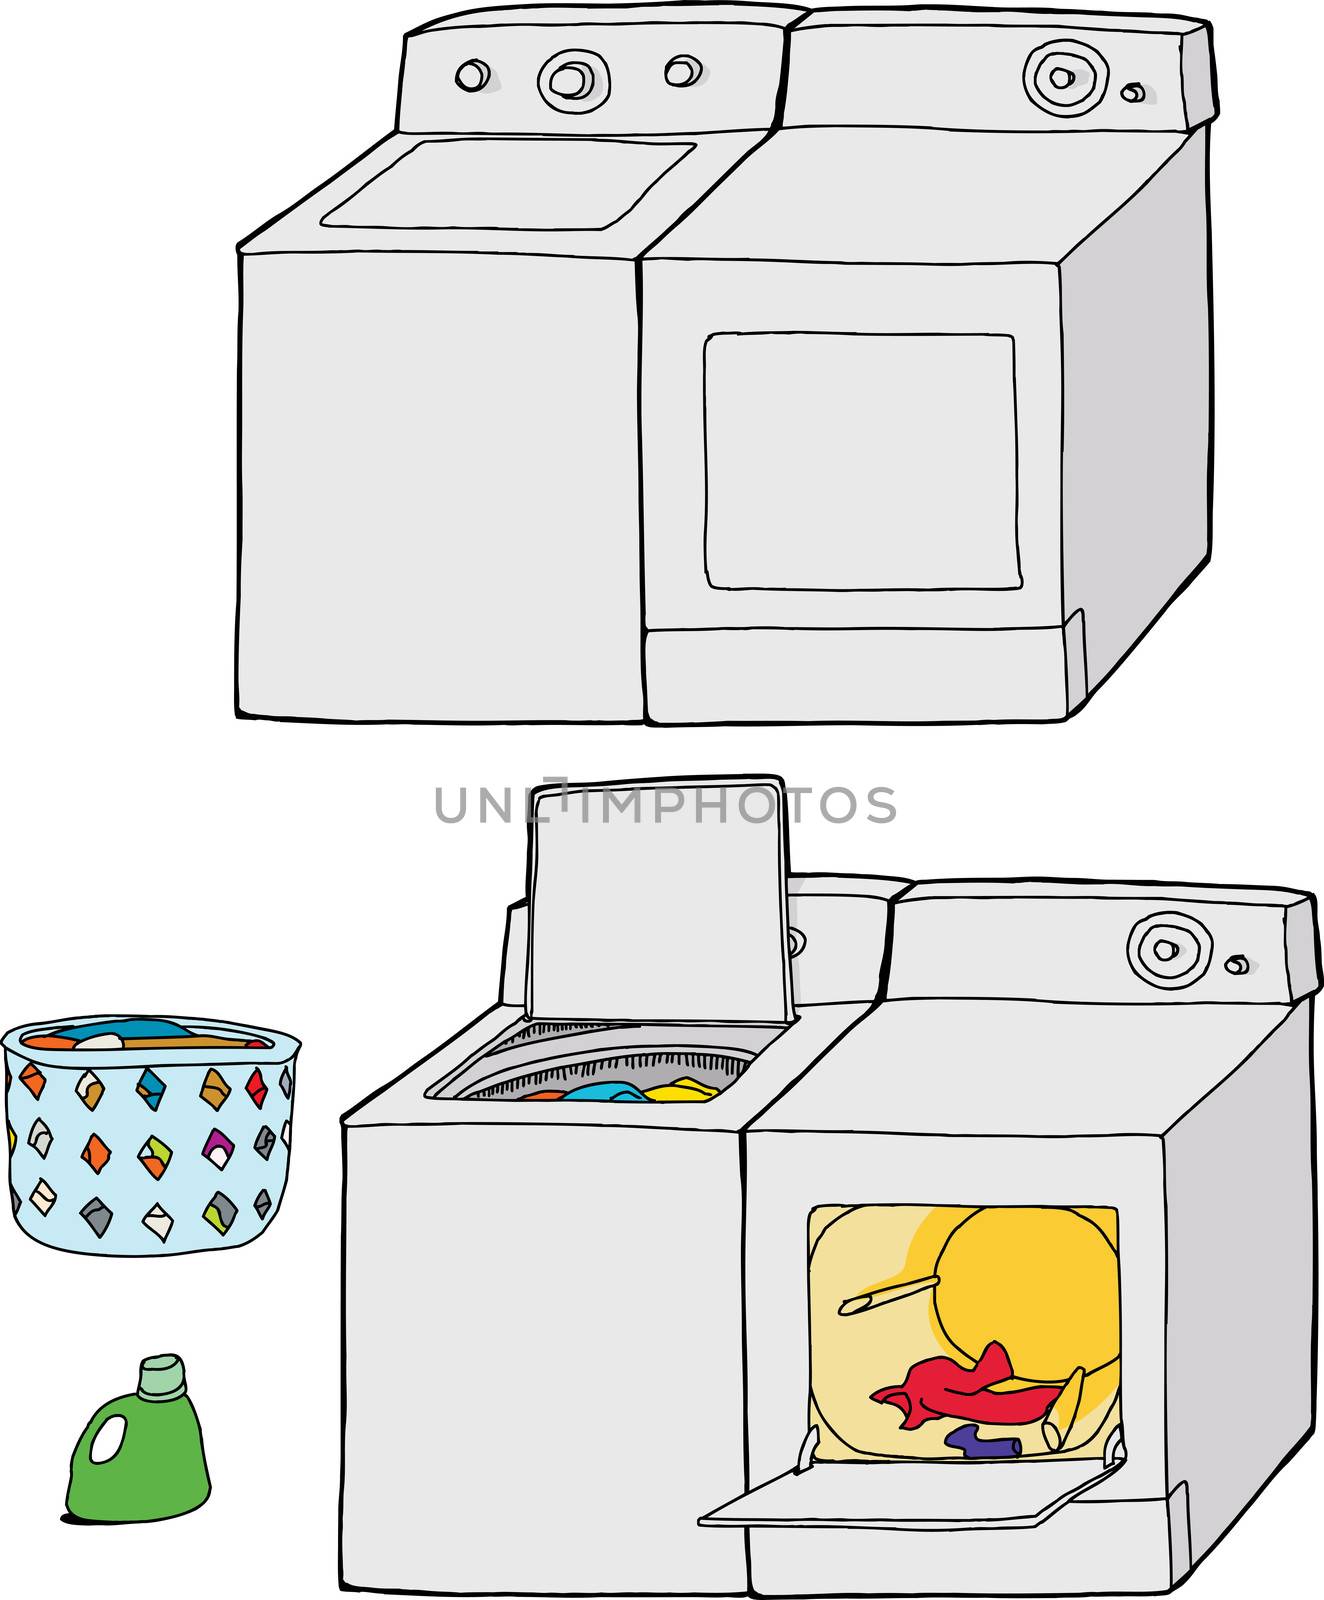 Washing machine and dryer cartoons with soap and clothing